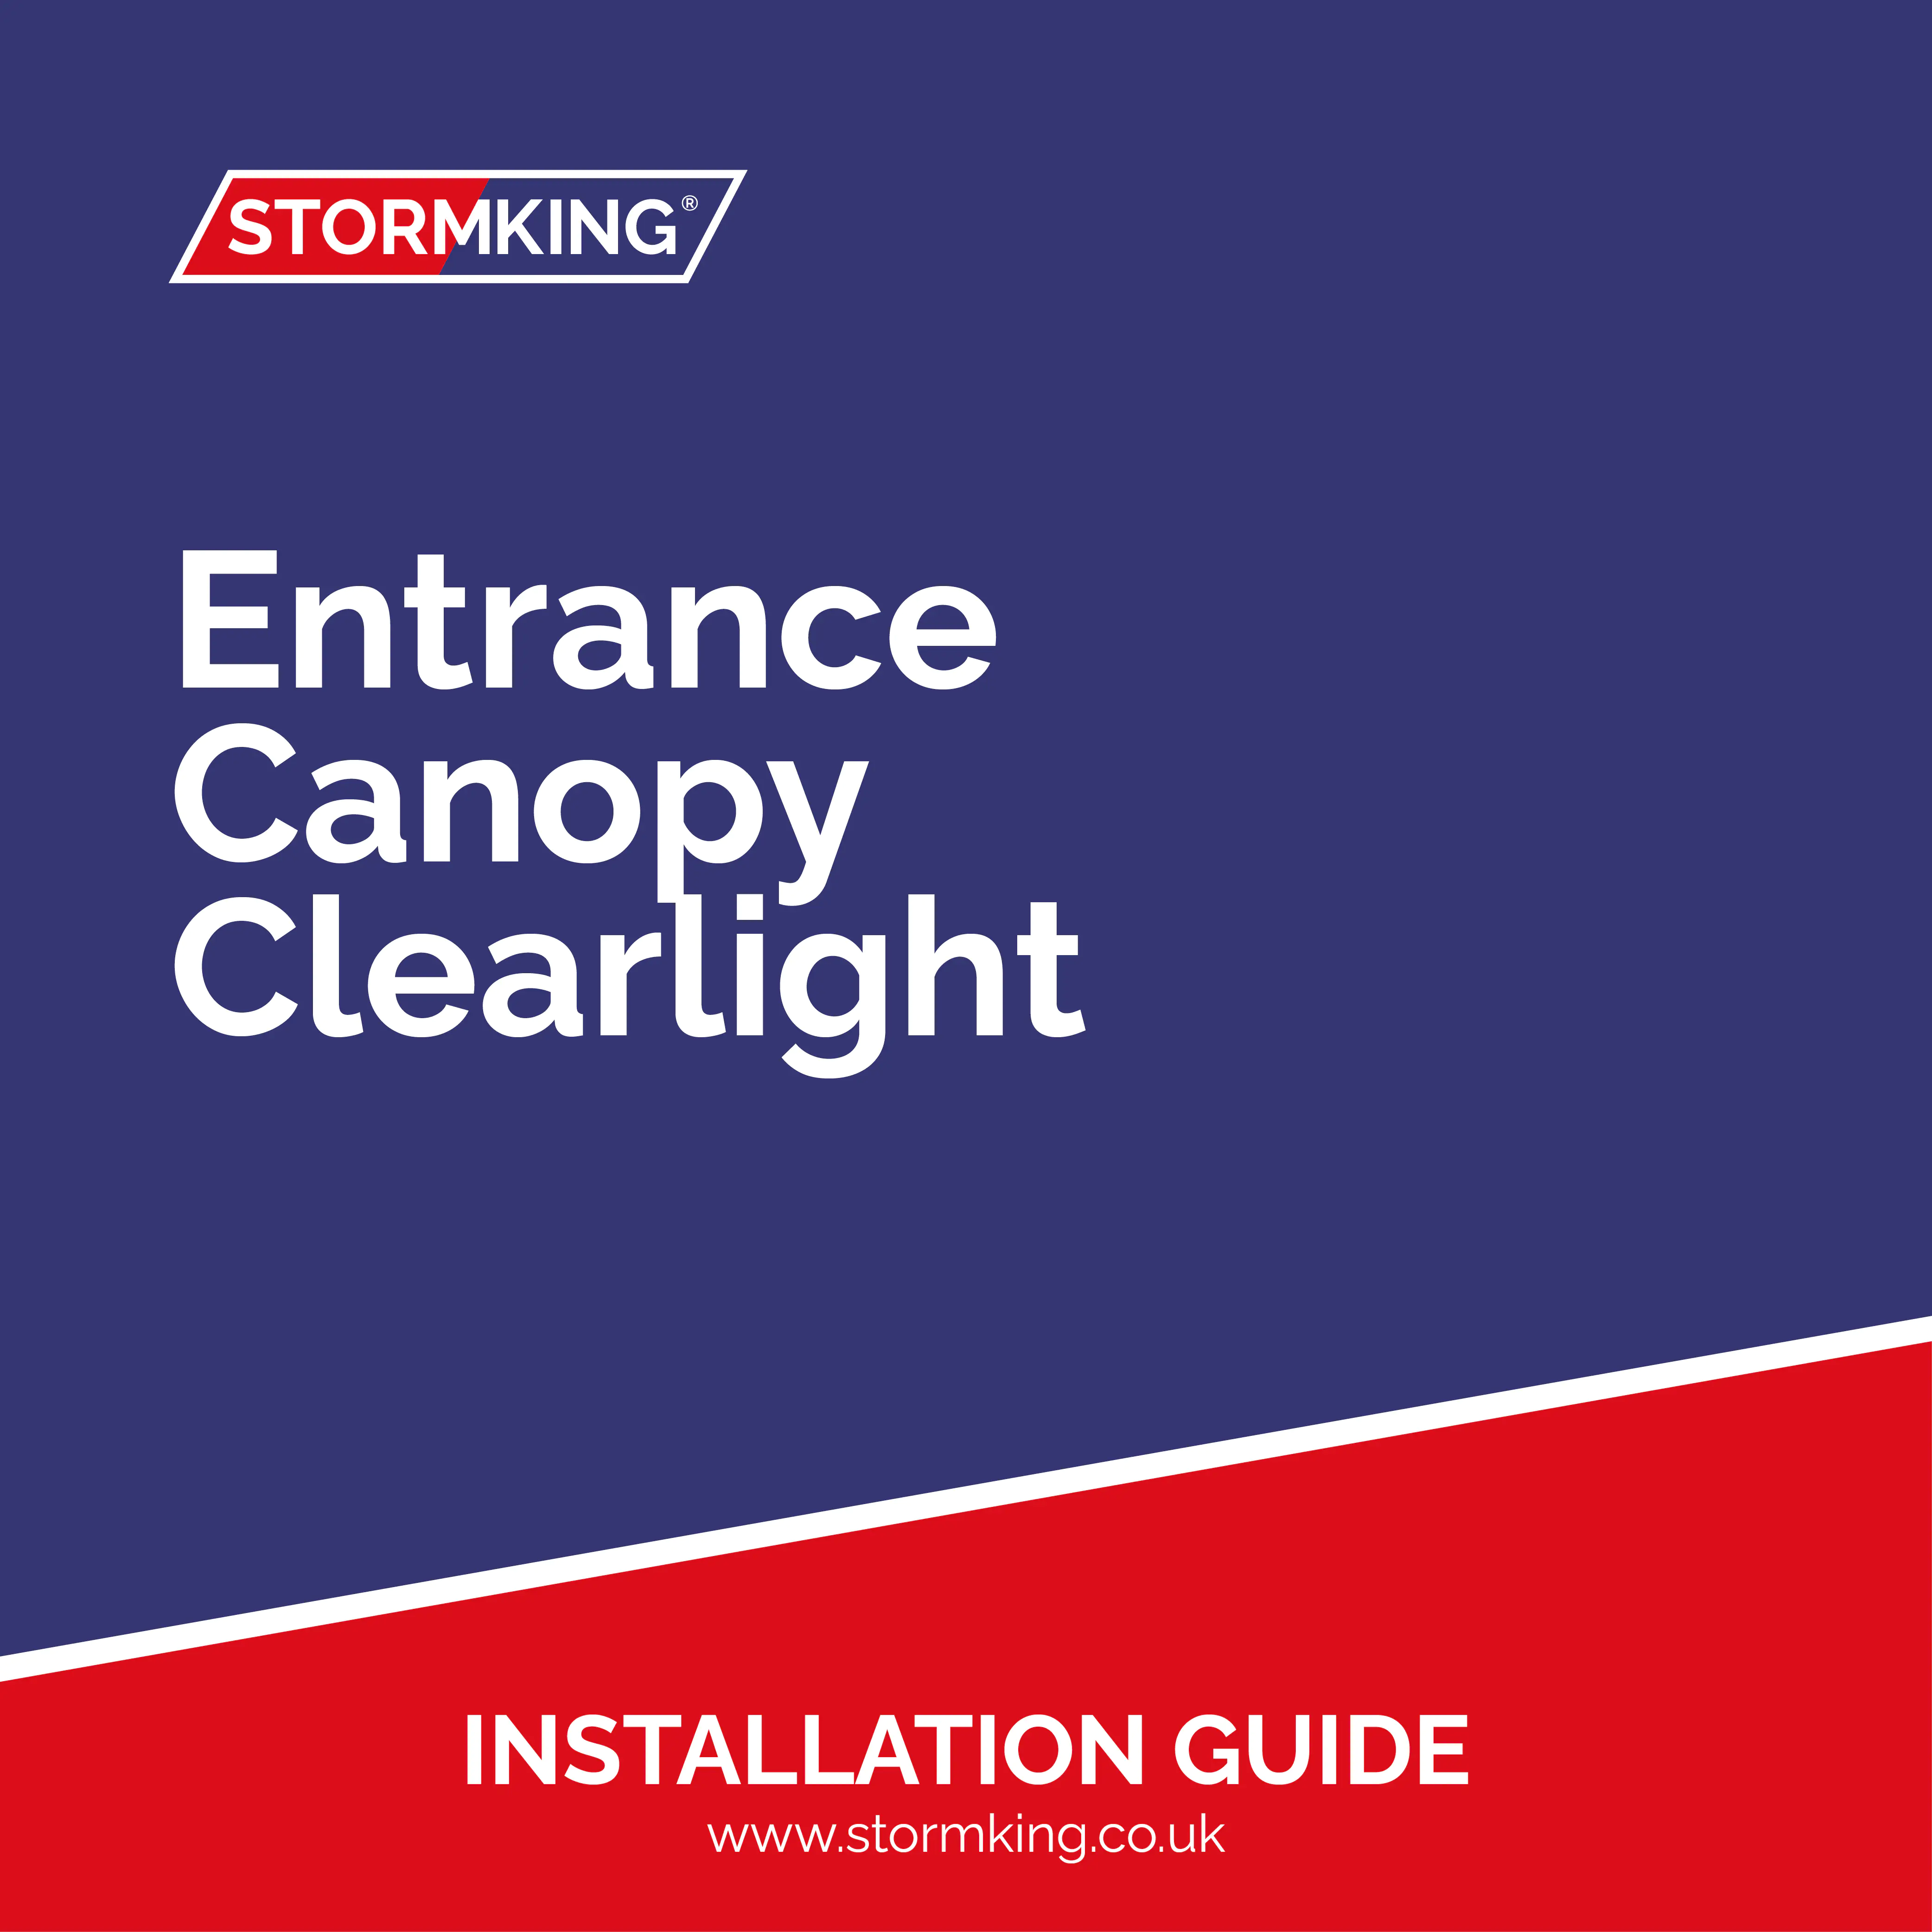 Entrance Canopy Clearlight